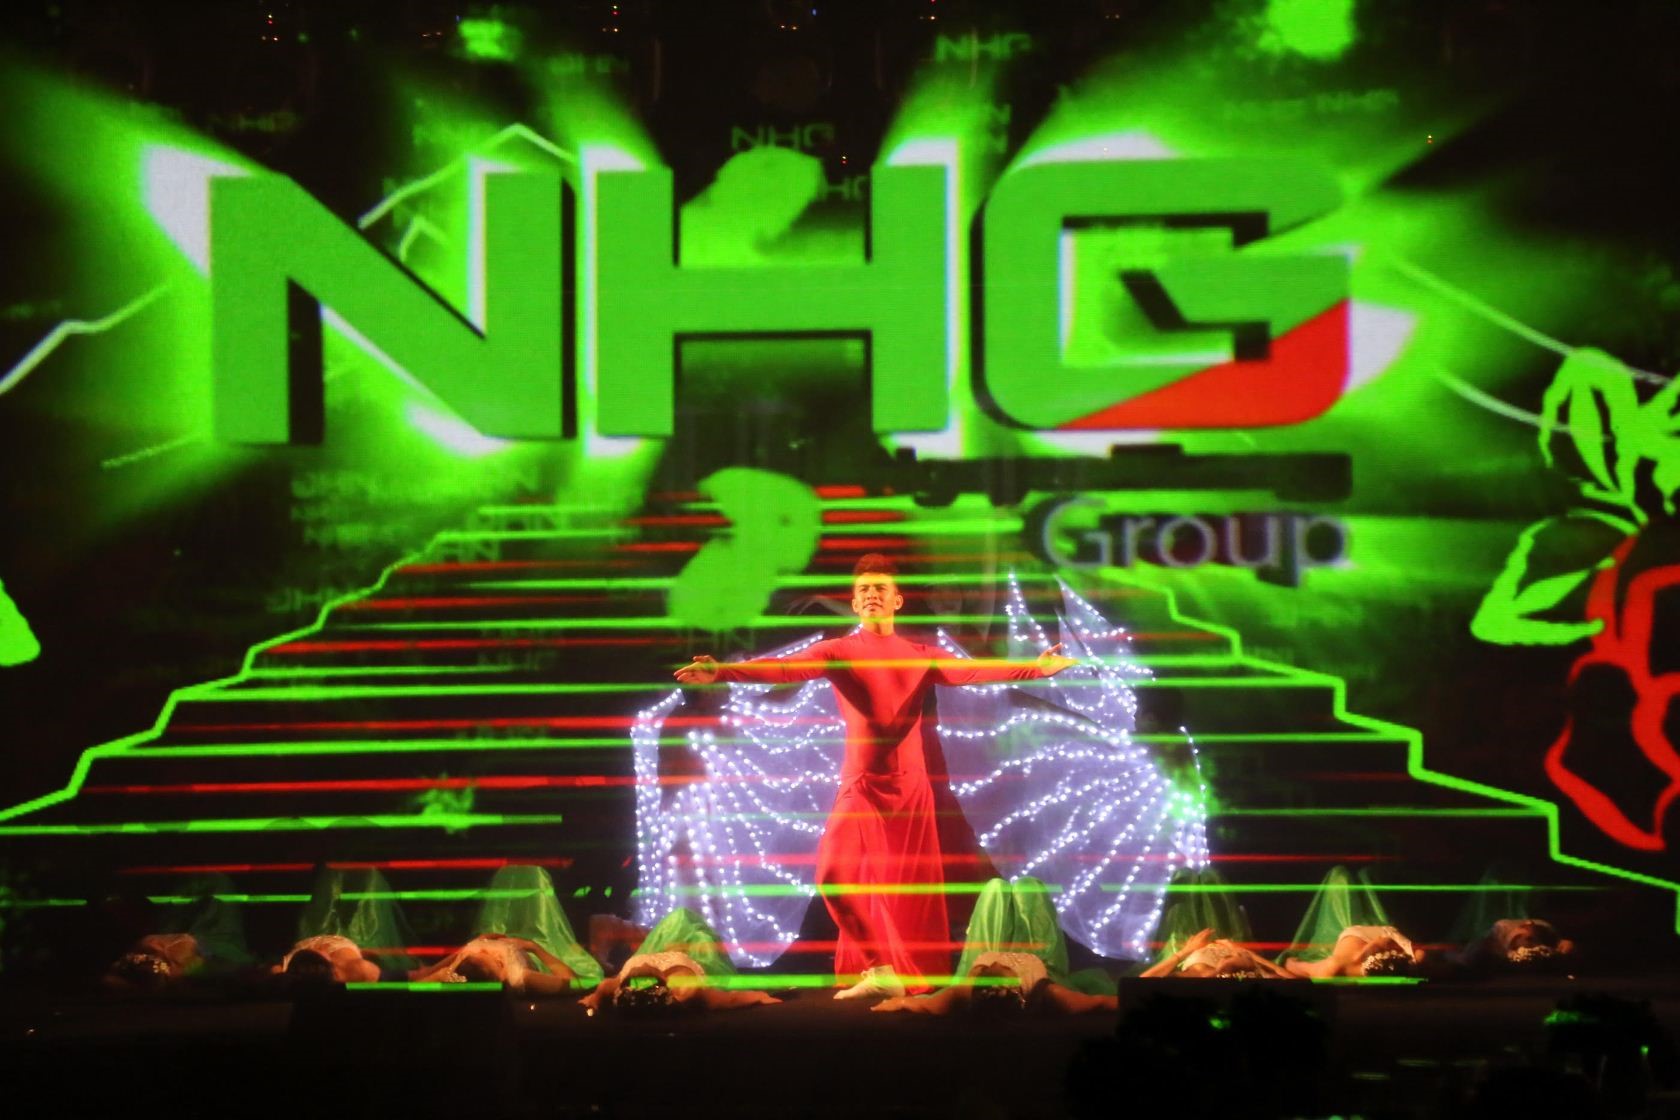 Hologram performance was left with a strong impression of the high artistry and the message of NHG's "human philosophy".